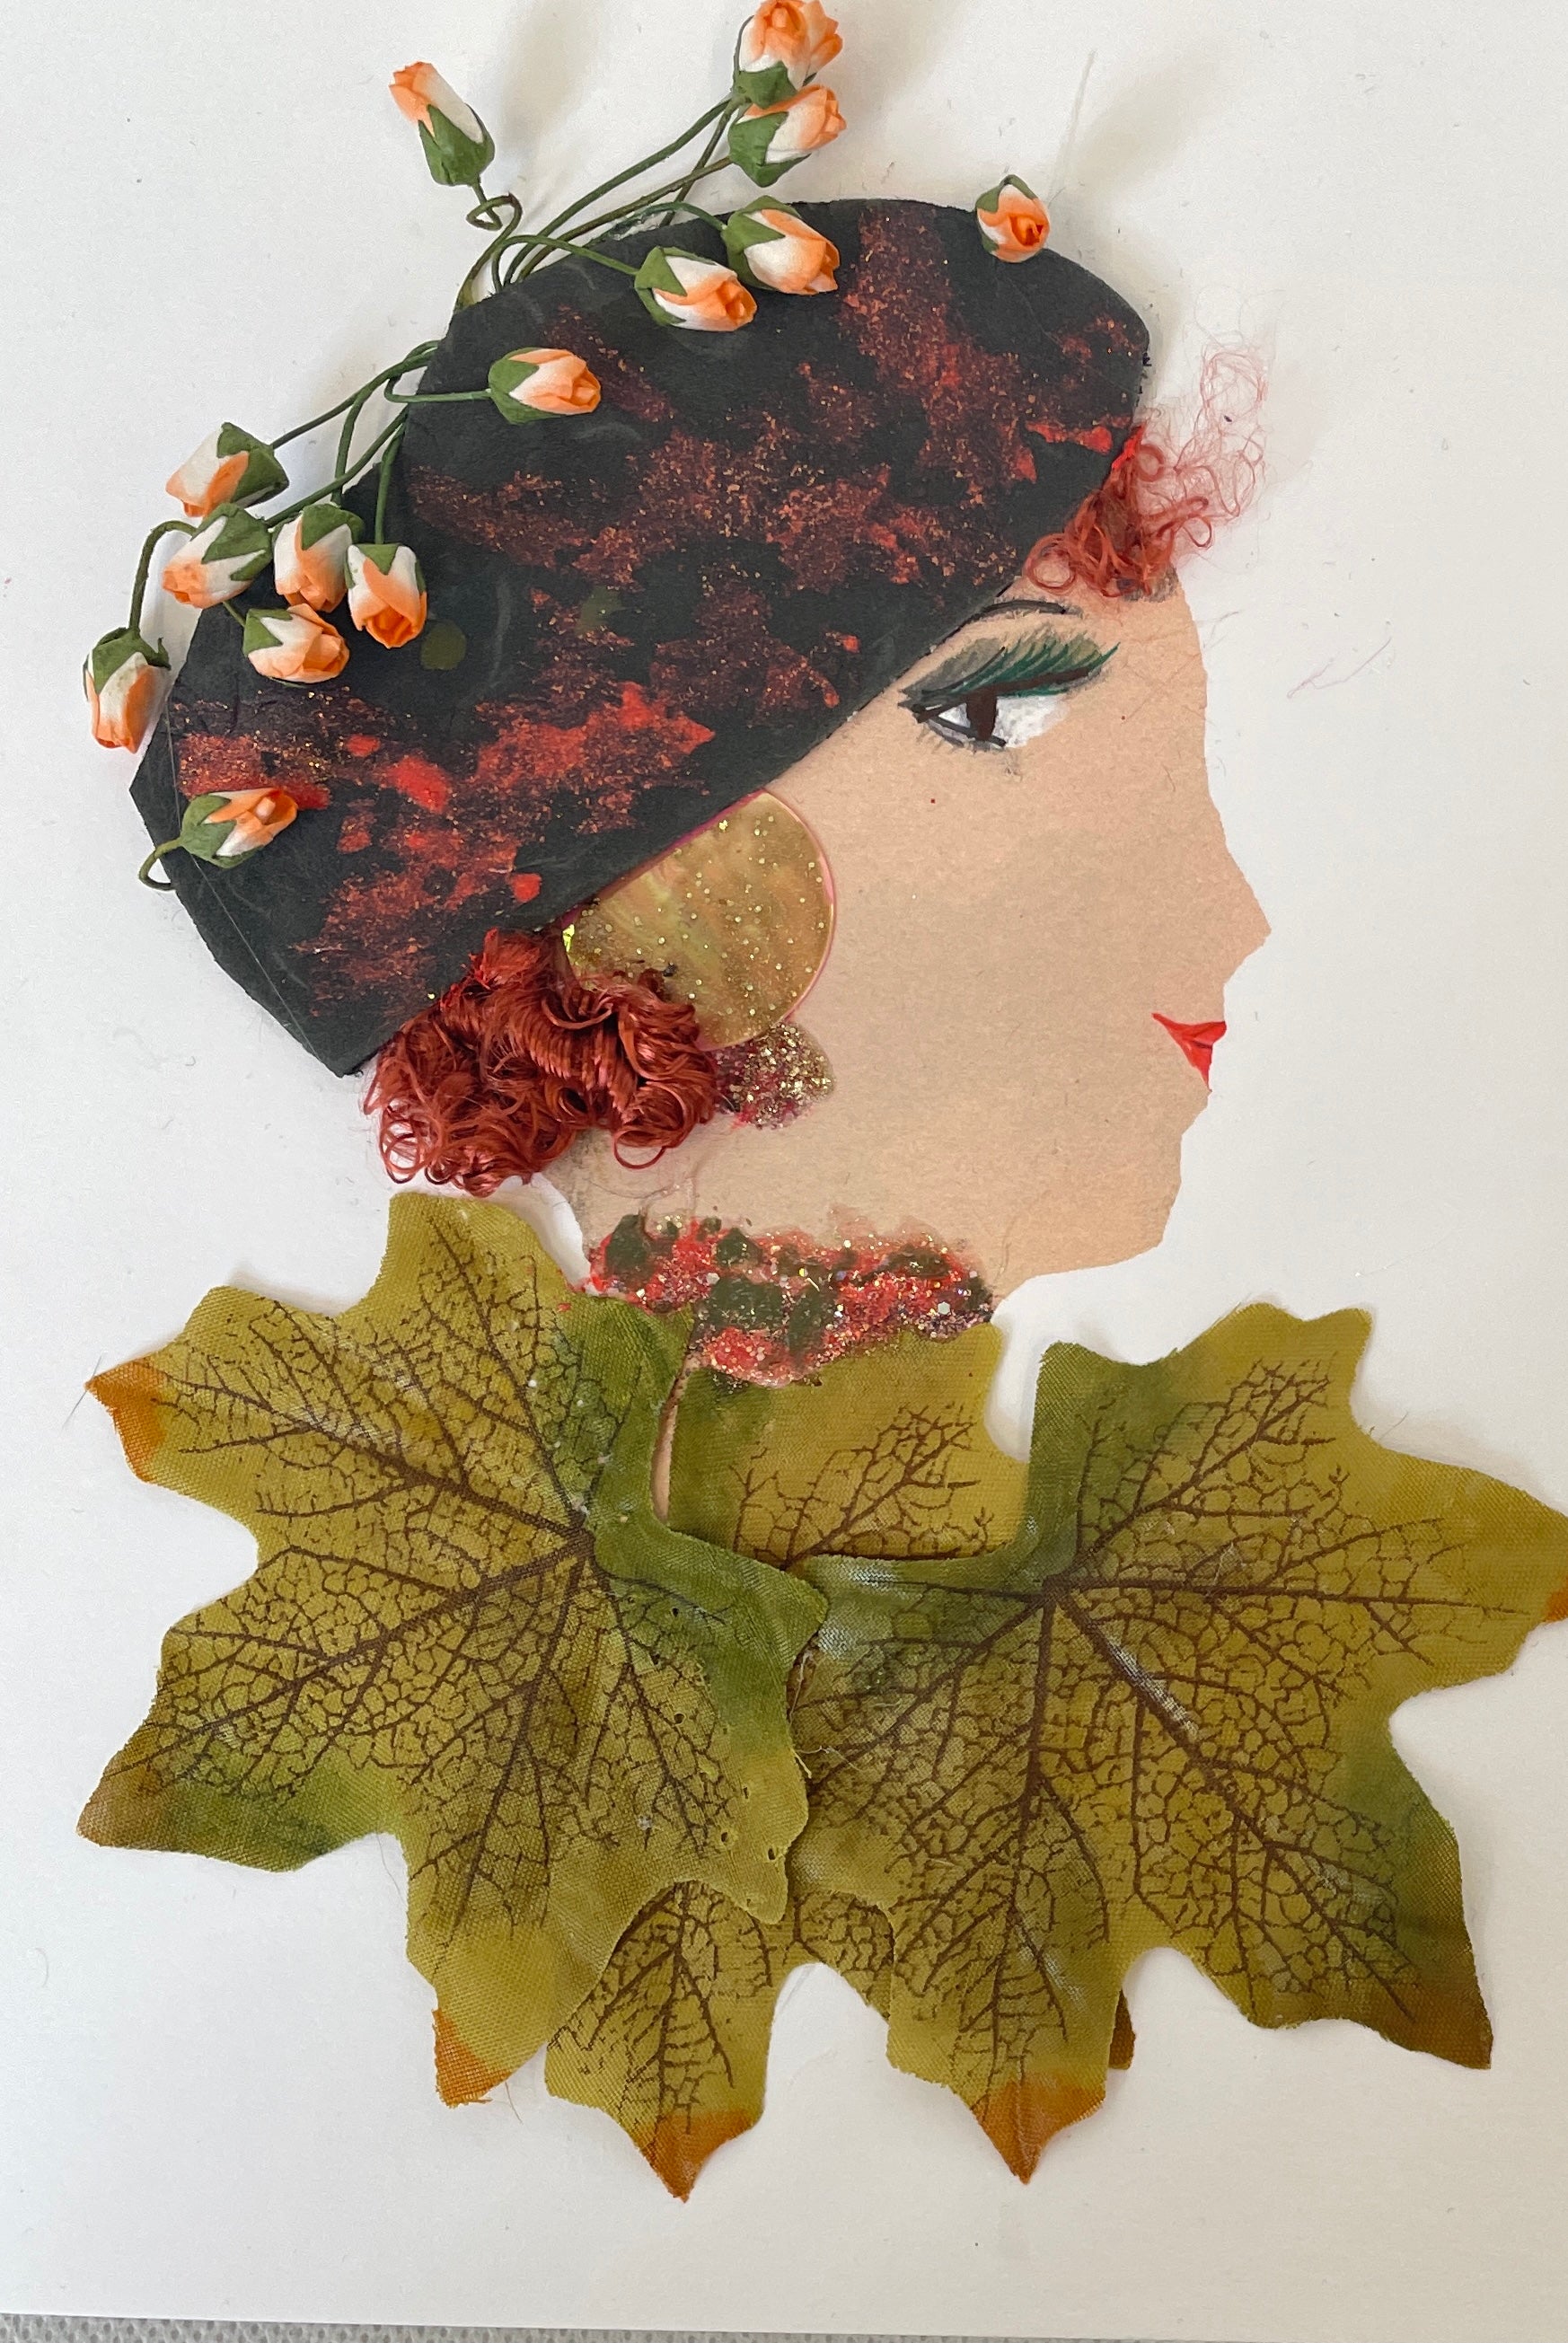 This card is of a woman named Apolonia Lindsay. She wears a dress made of green oak leaves and a beret which lays on top of her curly red hair. On top of the beret, there are small pink roses.